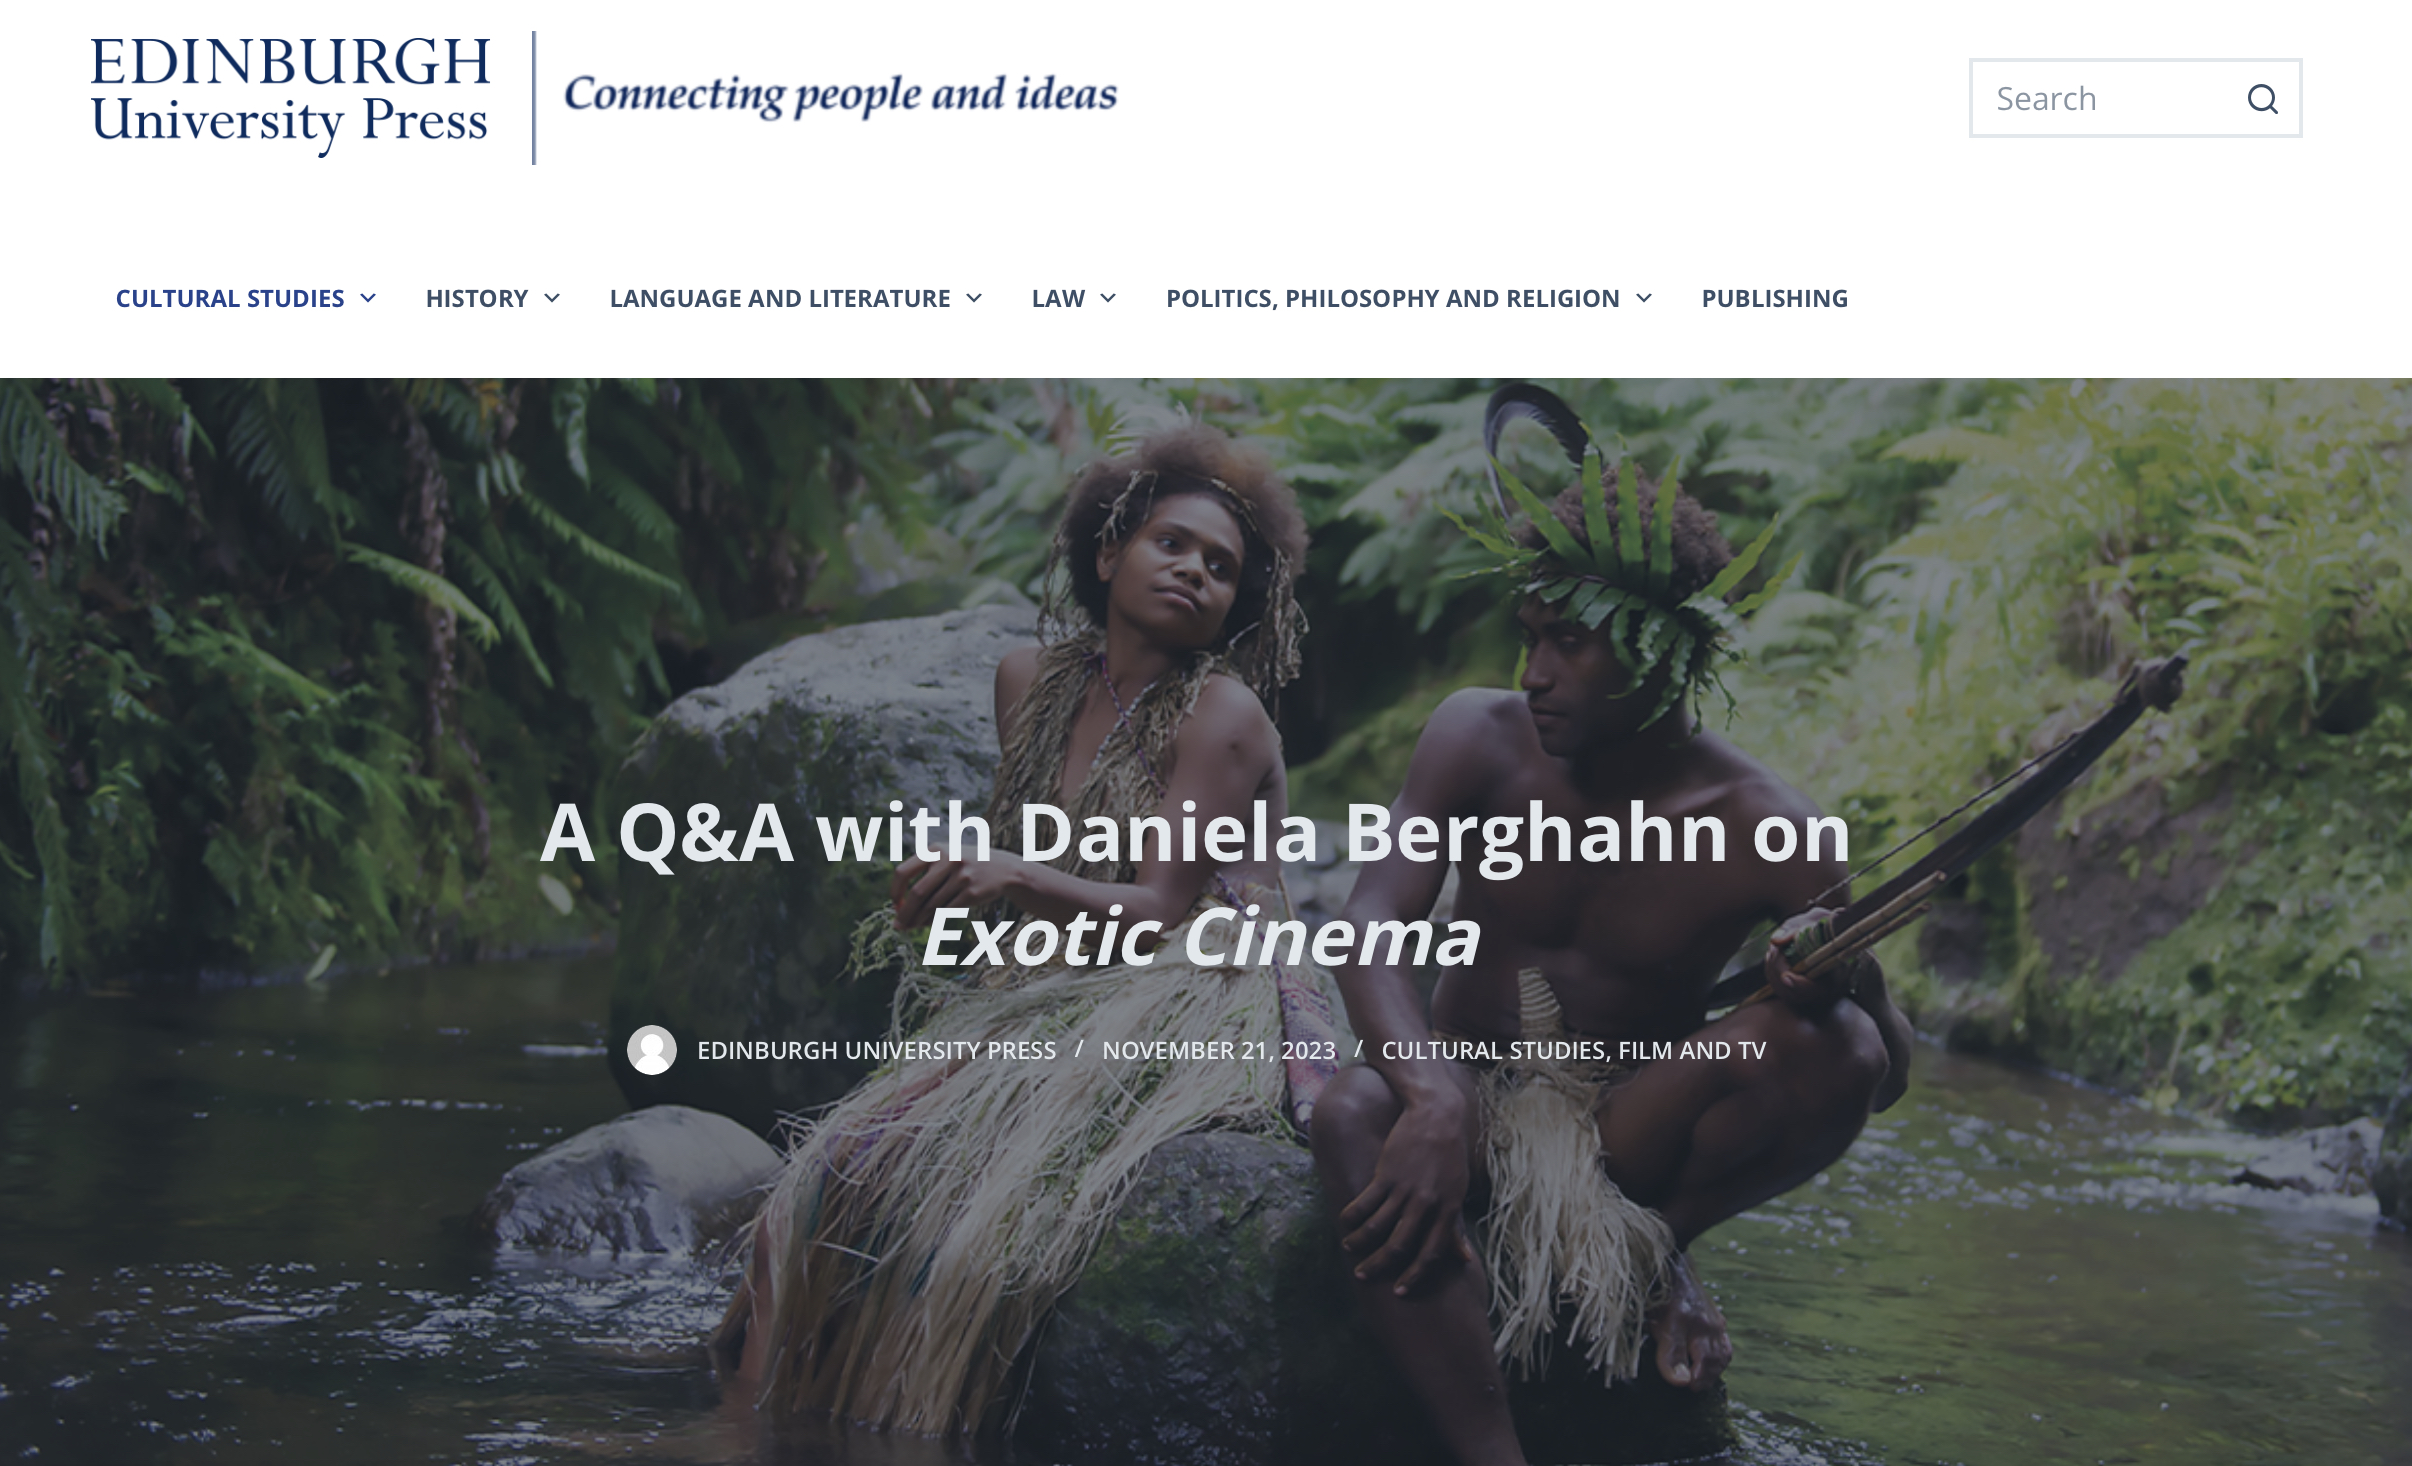 Author Q&A about Exotic Cinema book